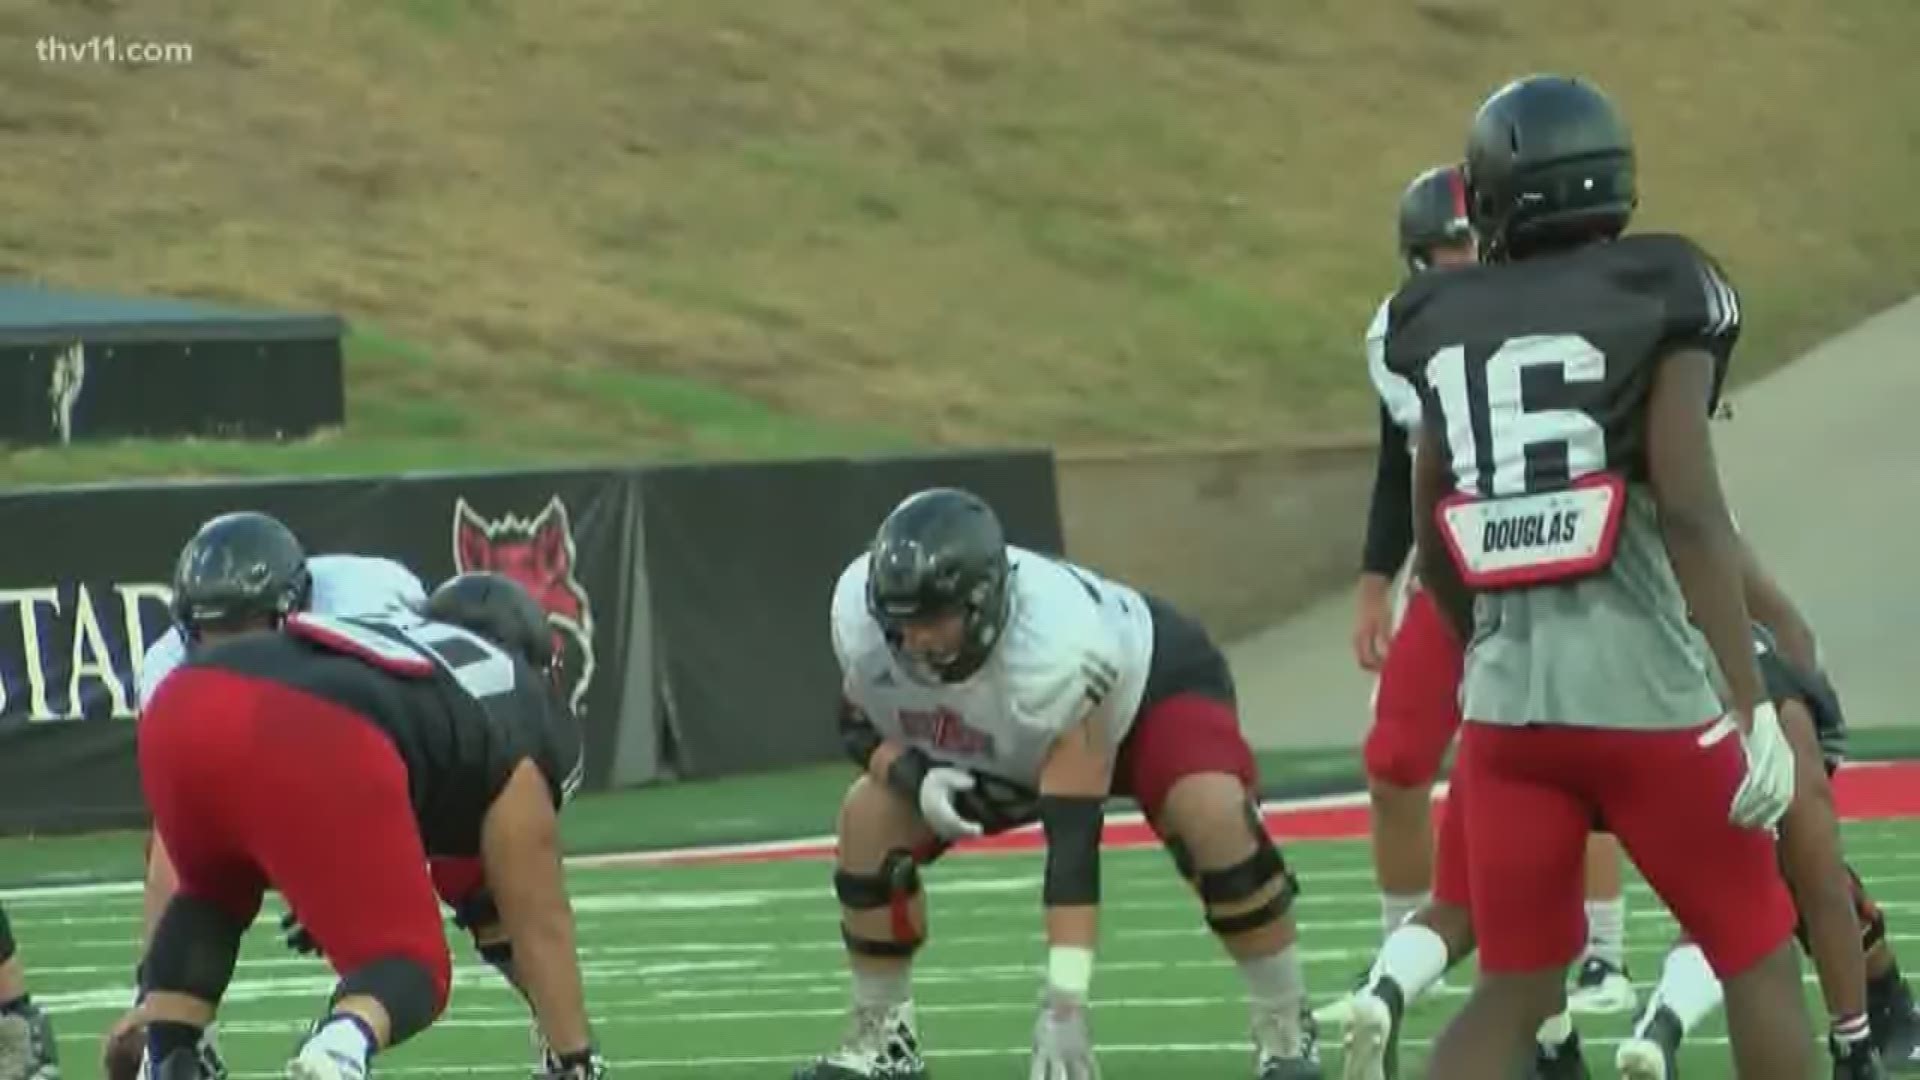 Blake Anderson said that he saw significant offensive improvement between the Red Wolves' first and second scrimmage